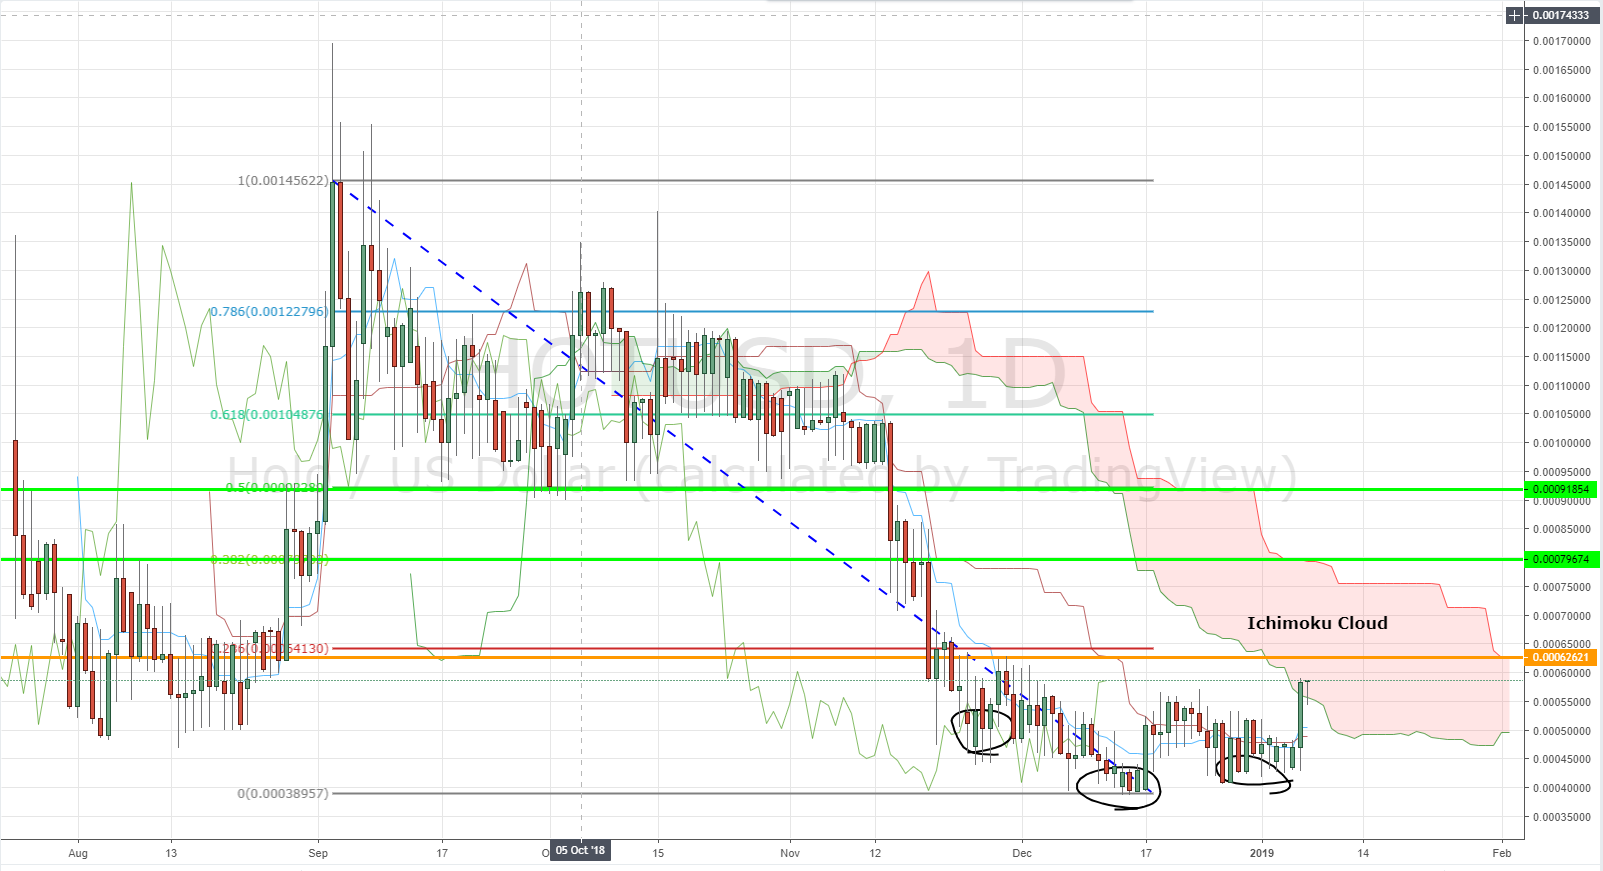 Holochain (HOT) Price Action - HOT/USD Daily Chart